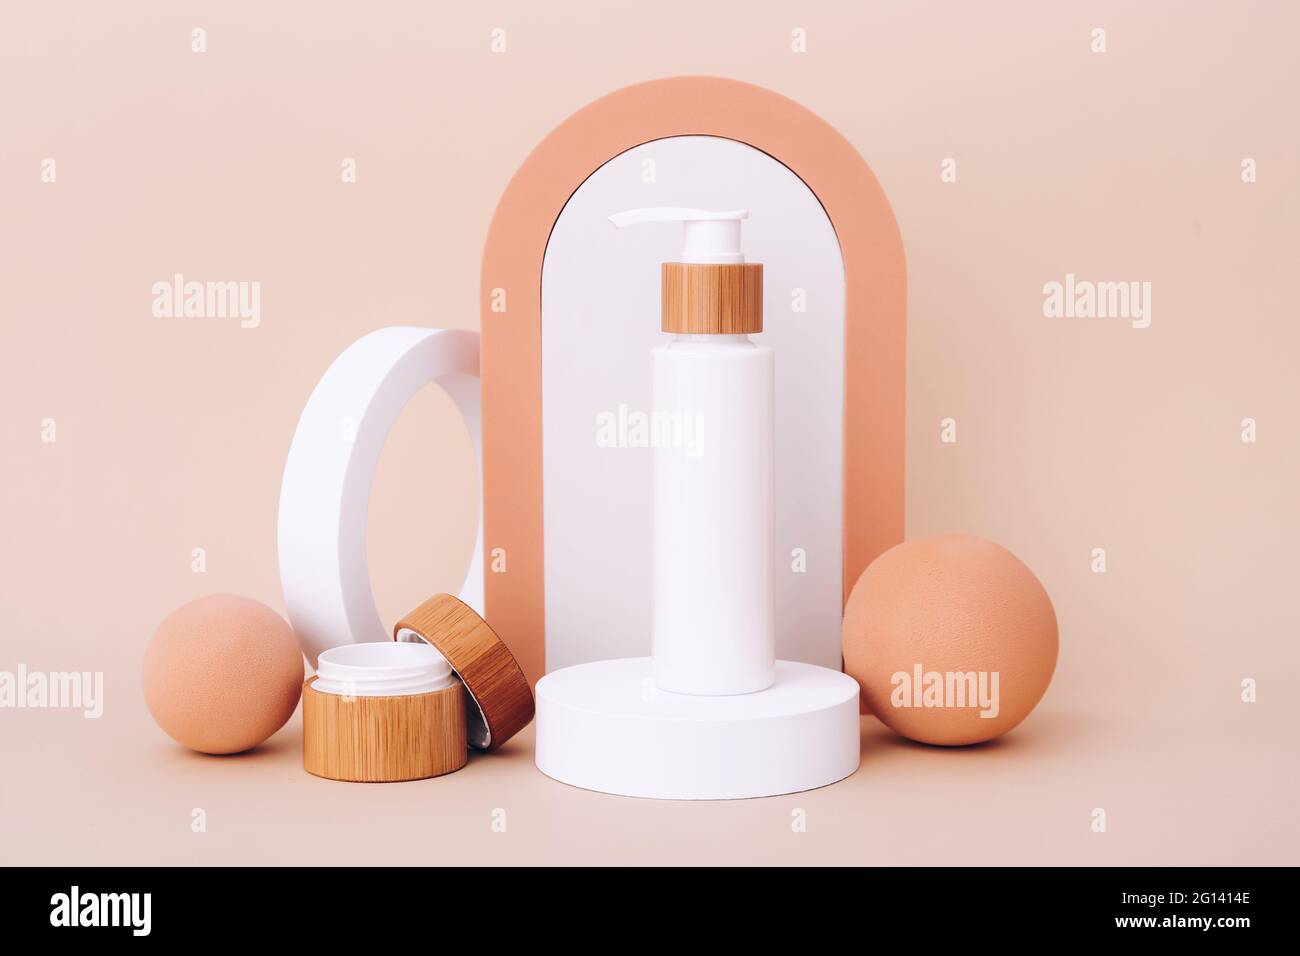 Cosmetic bottles on the geometric podiums. Presentation template for natural beauty products on beige background Stock Photo